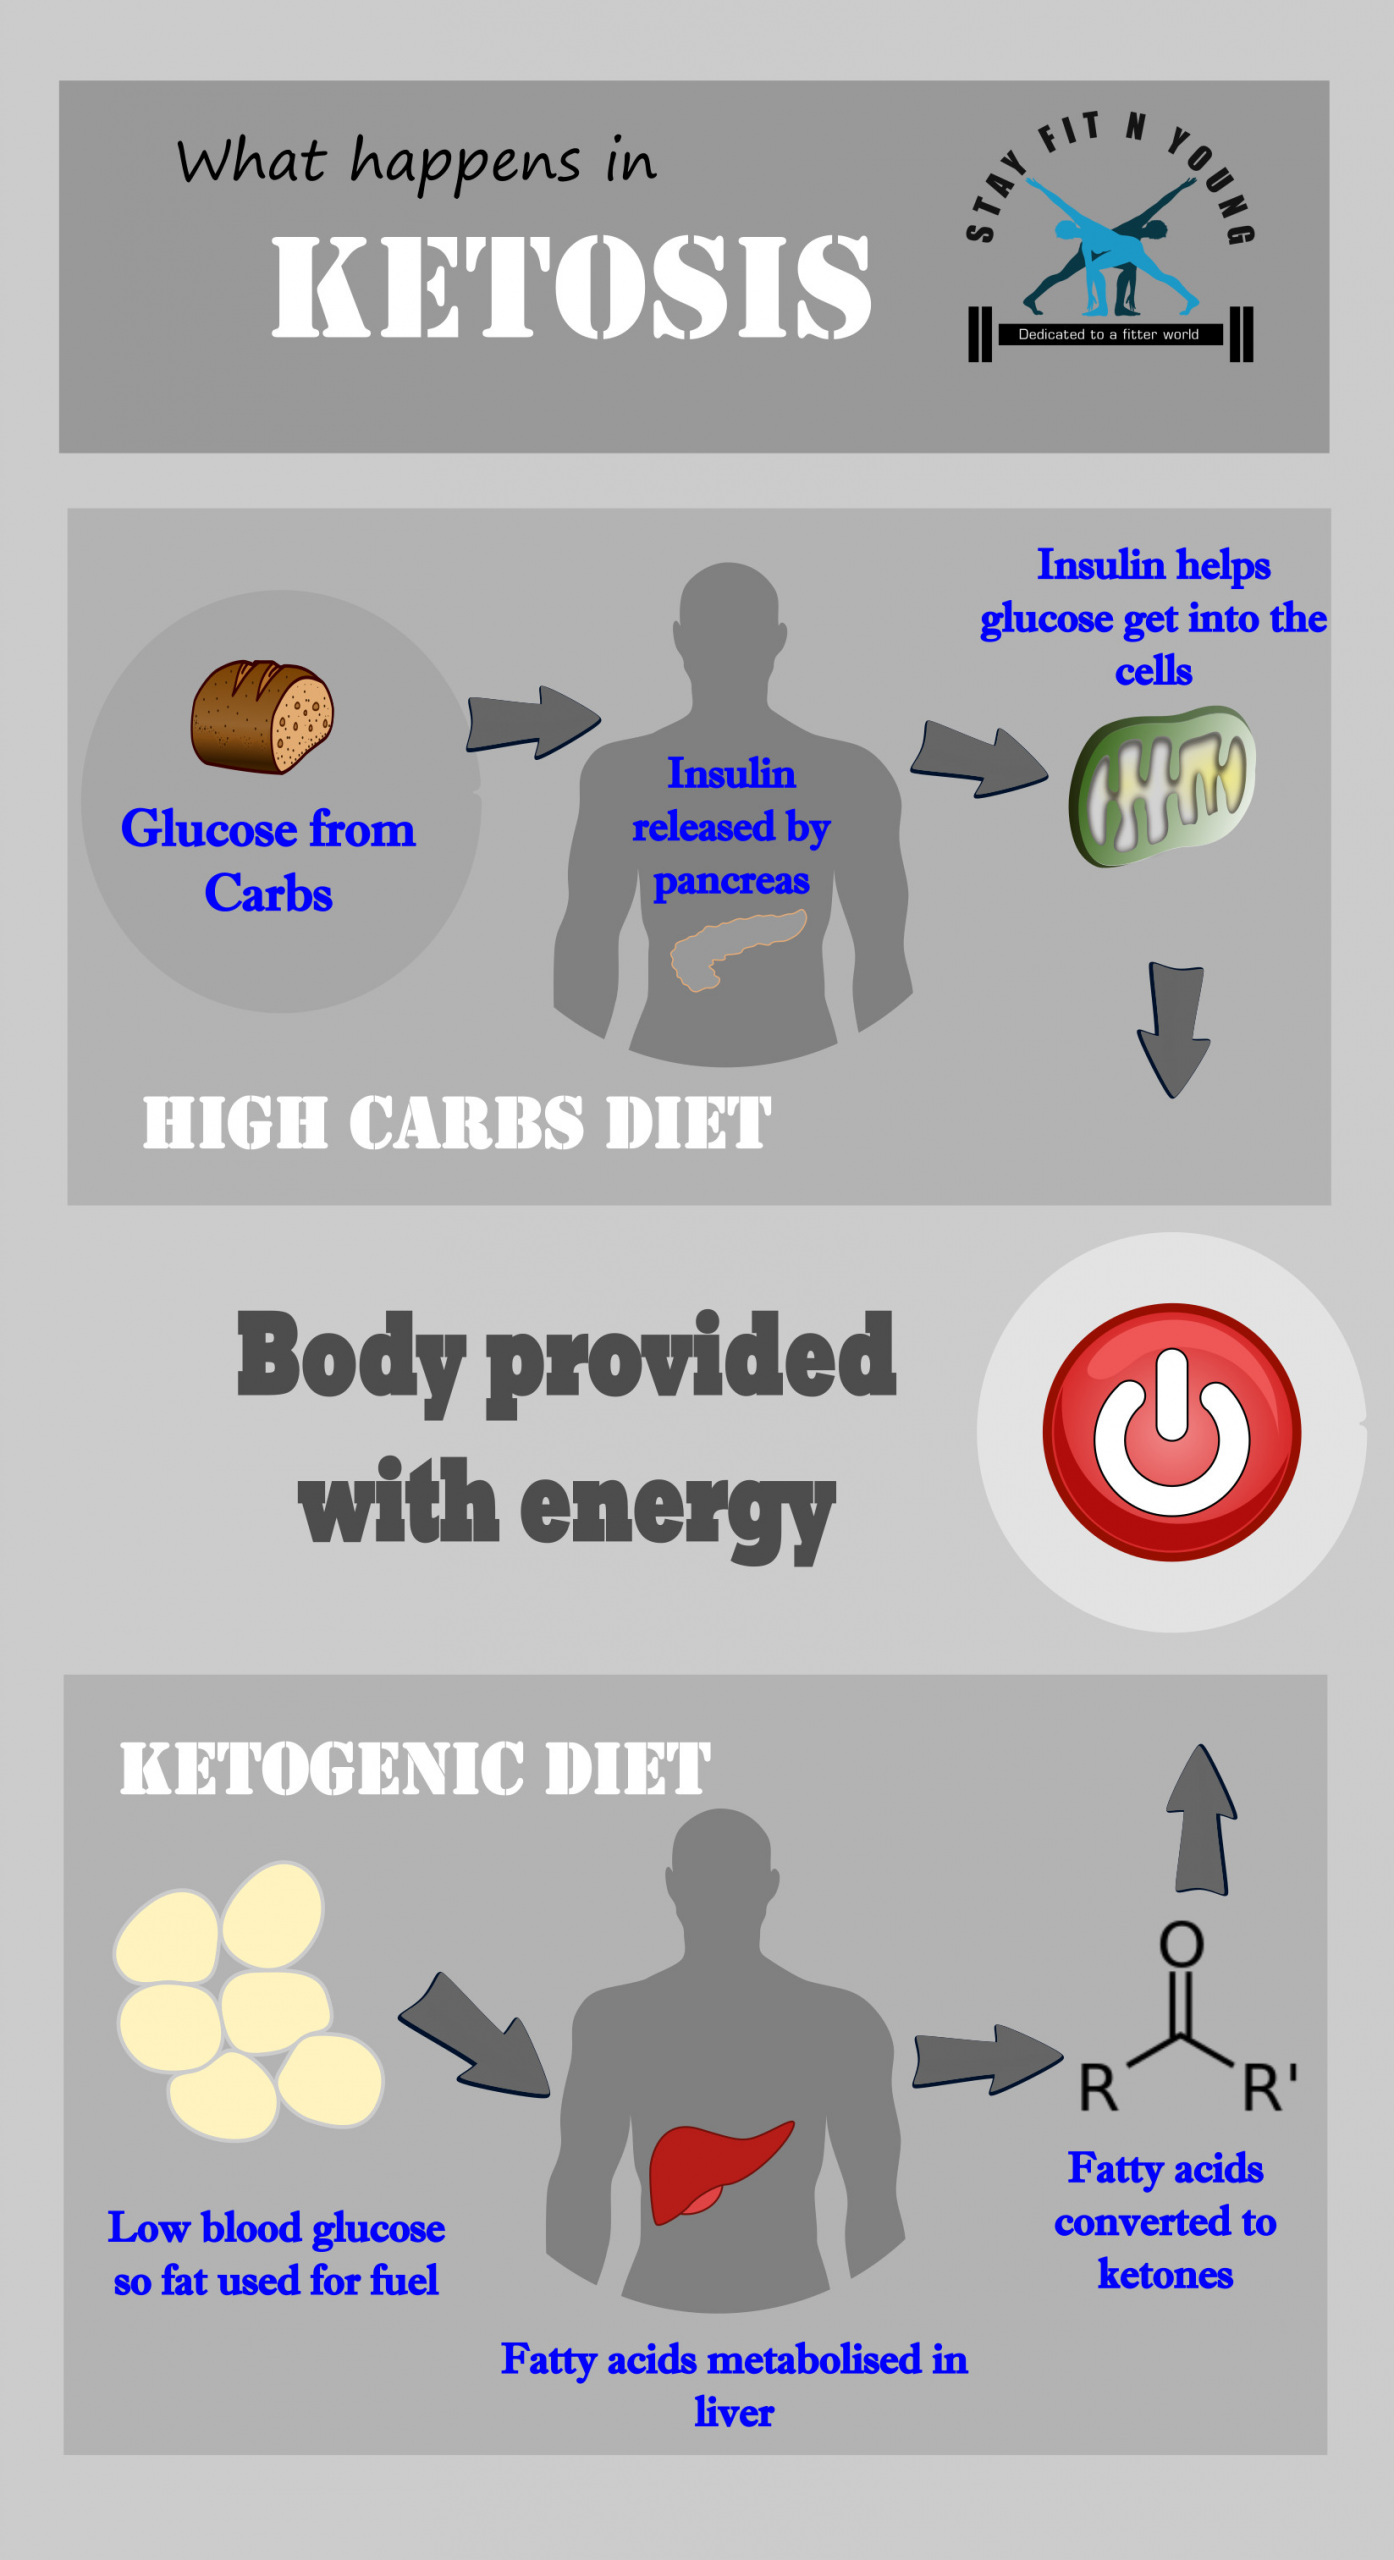 Keto Diet Downsides
 Pros and Cons of a Ketogenic Diet that you should know about